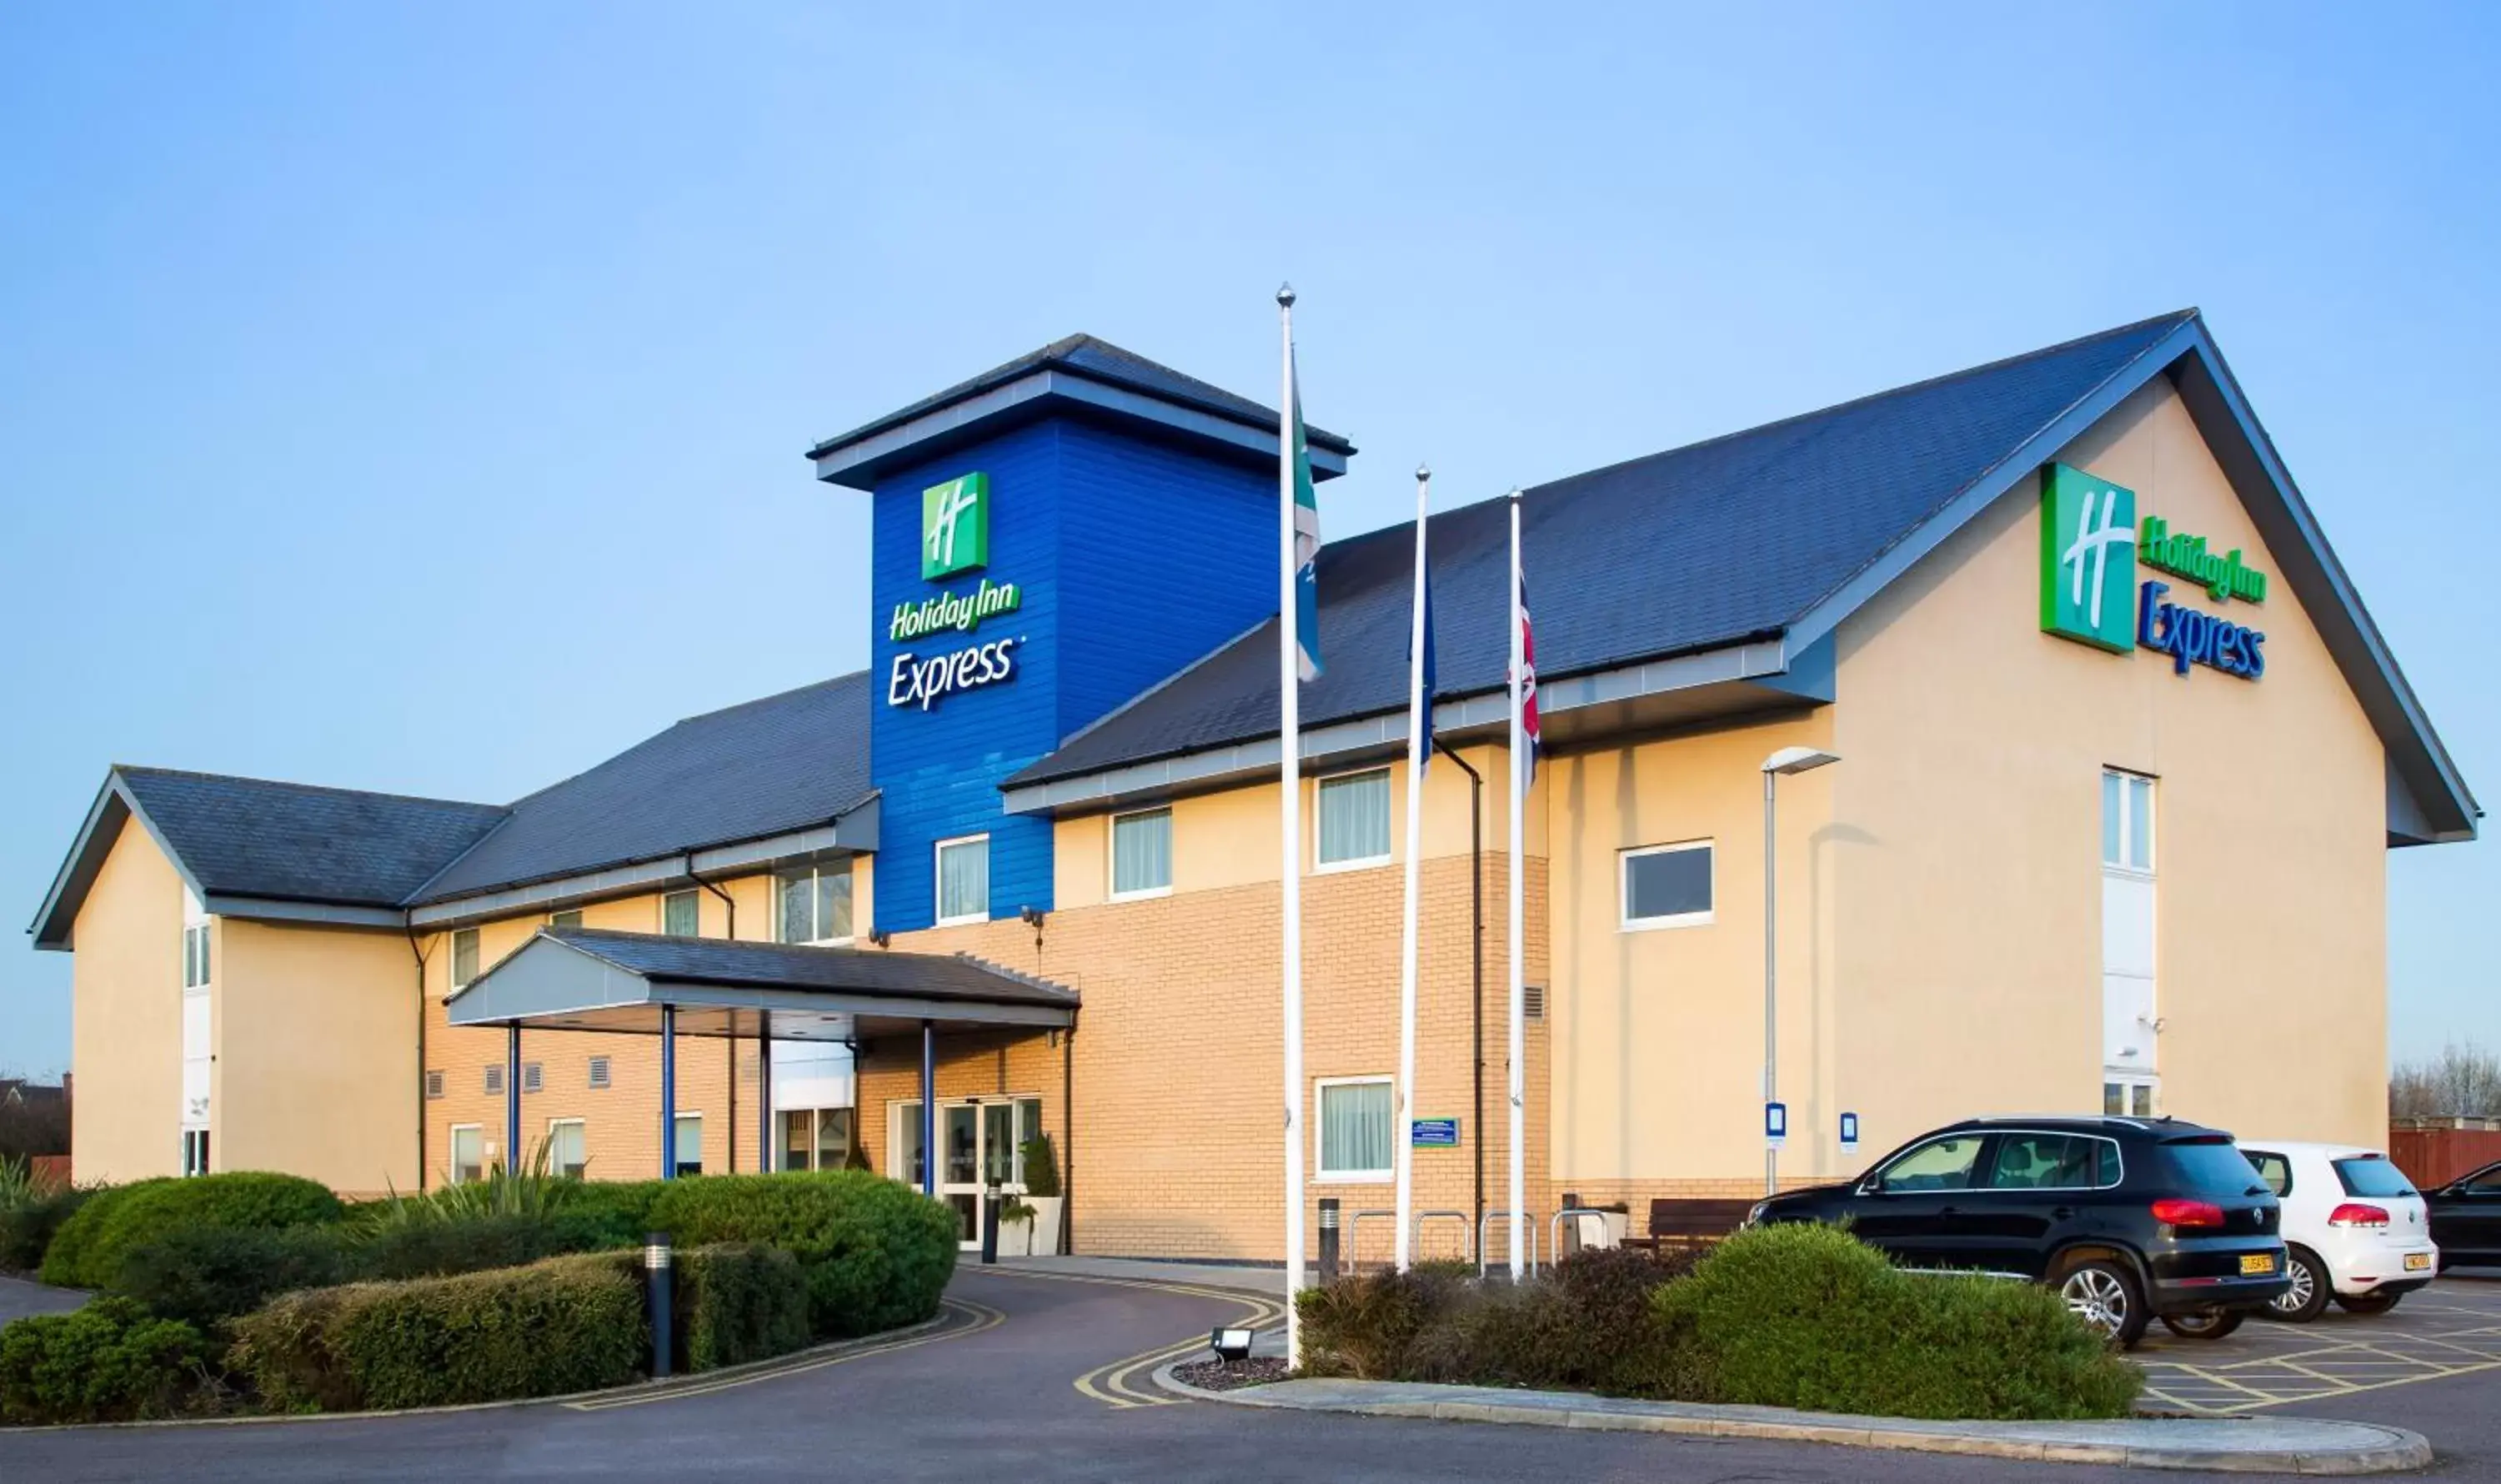 Property Building in Holiday Inn Express Braintree, an IHG Hotel